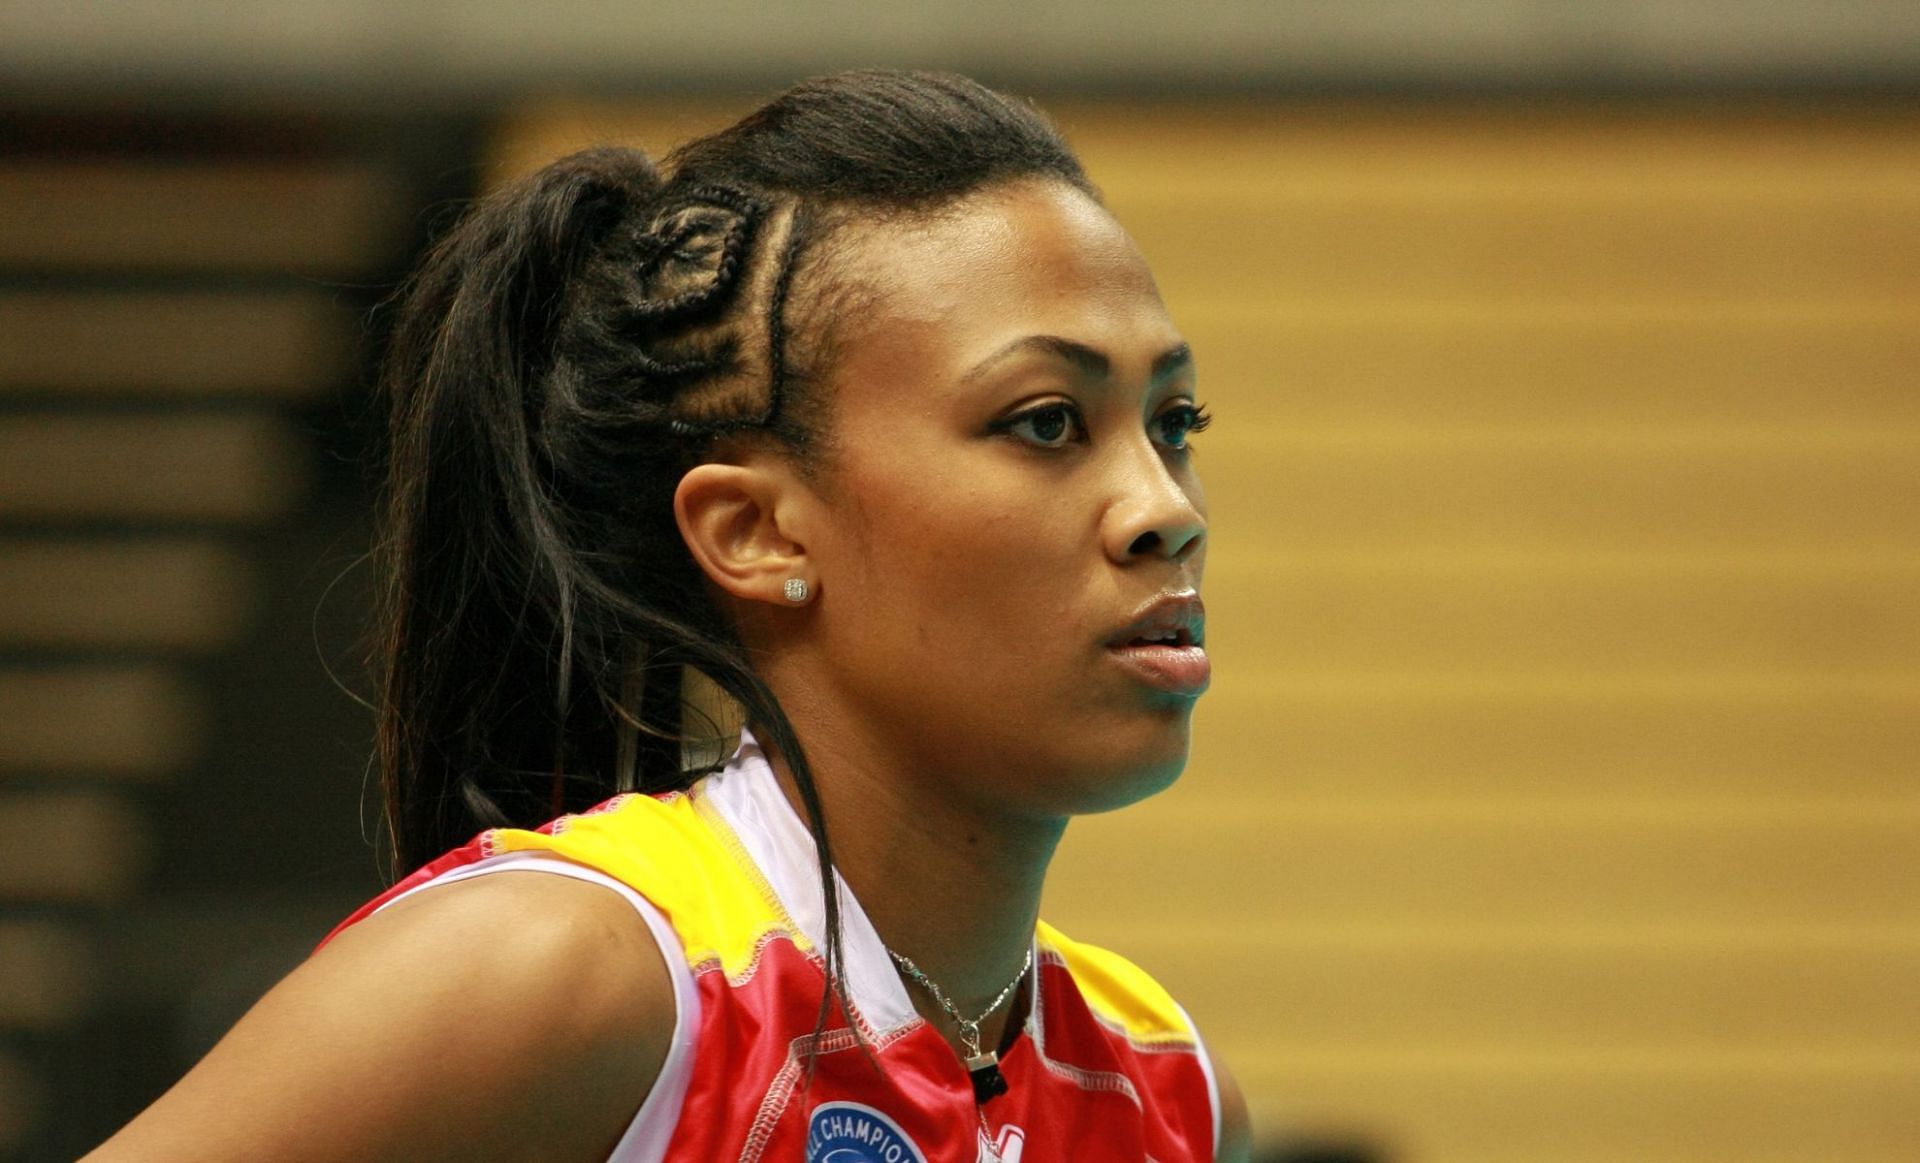 Kim Glass played volleyball in 2008 at the Beijing Olympic. (Image via Wikipedia)